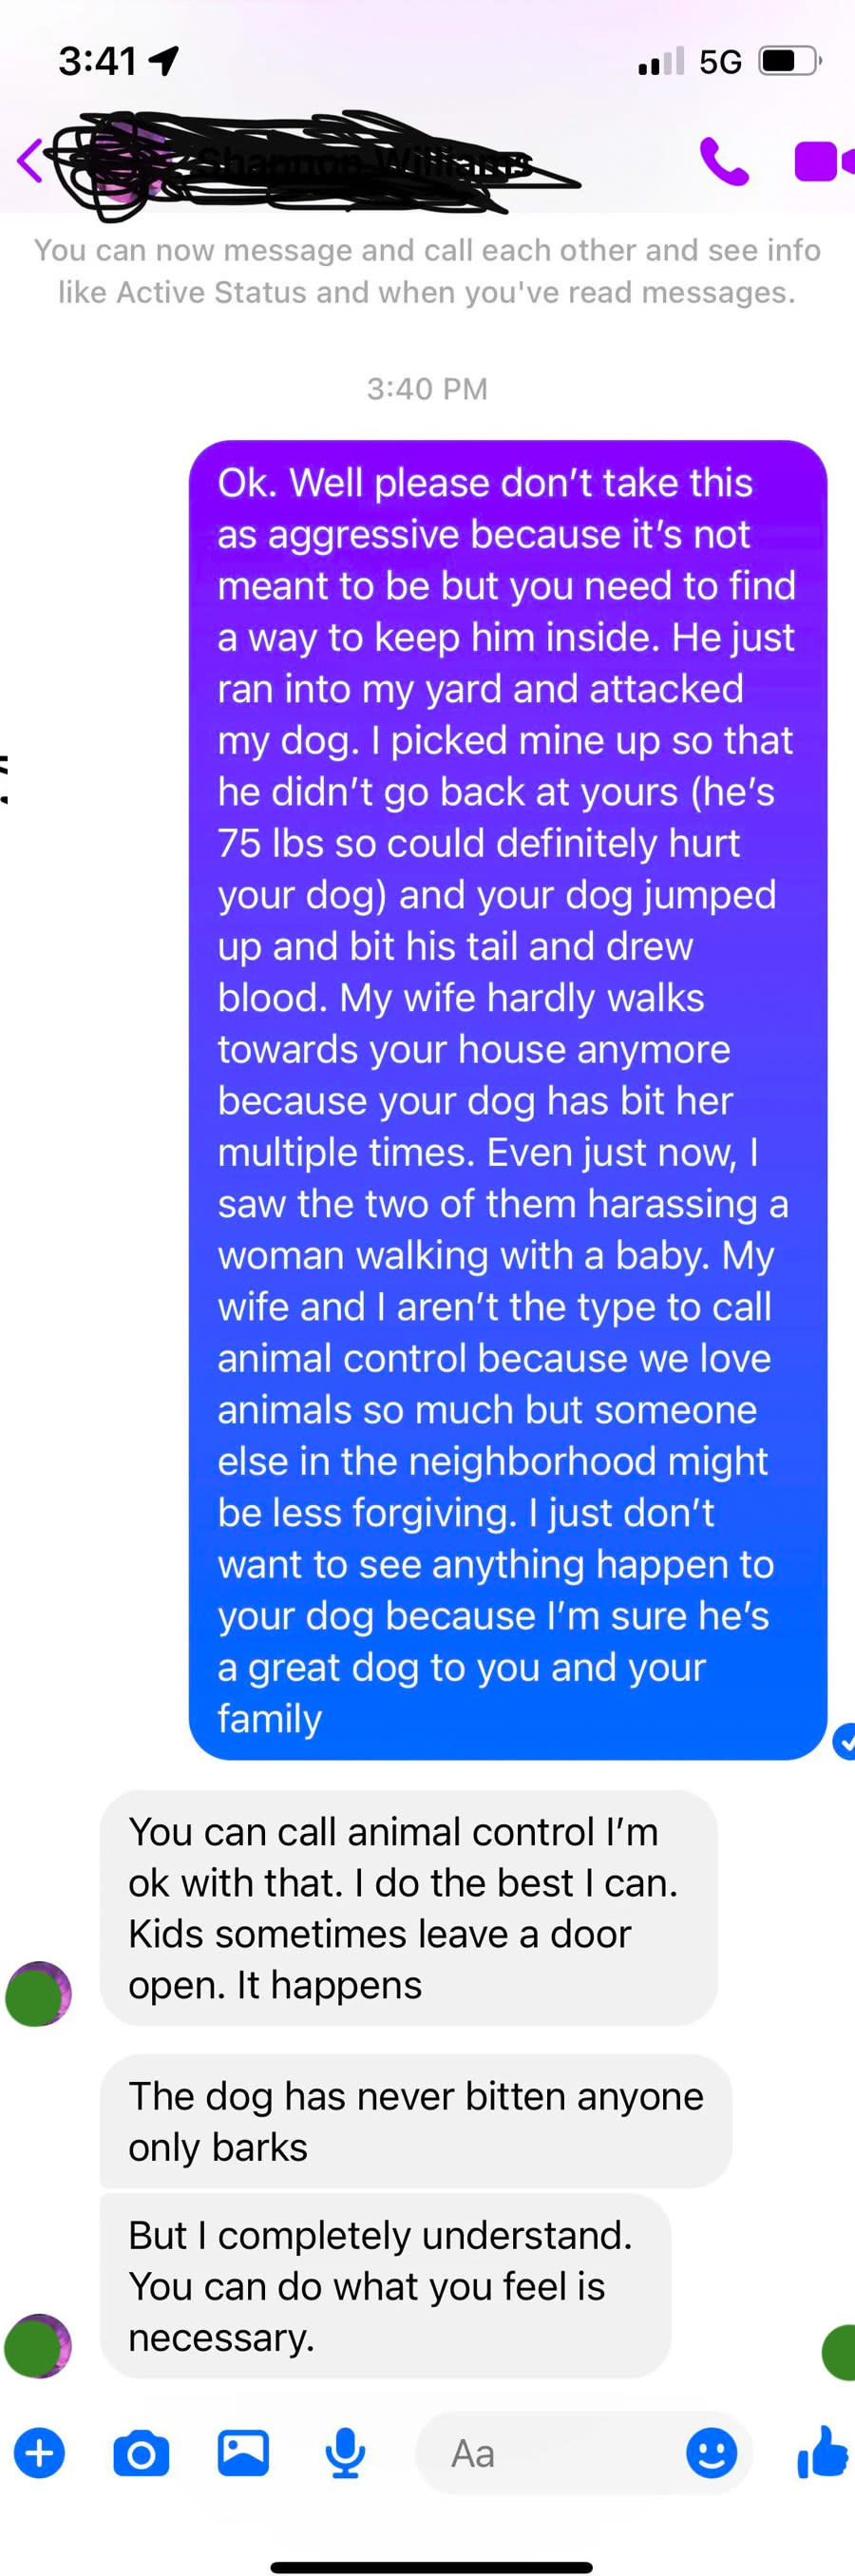 A person says their neighbor's dog bit their dog and has bitten their wife, and the neighbor whose dog it is says to just call animal control